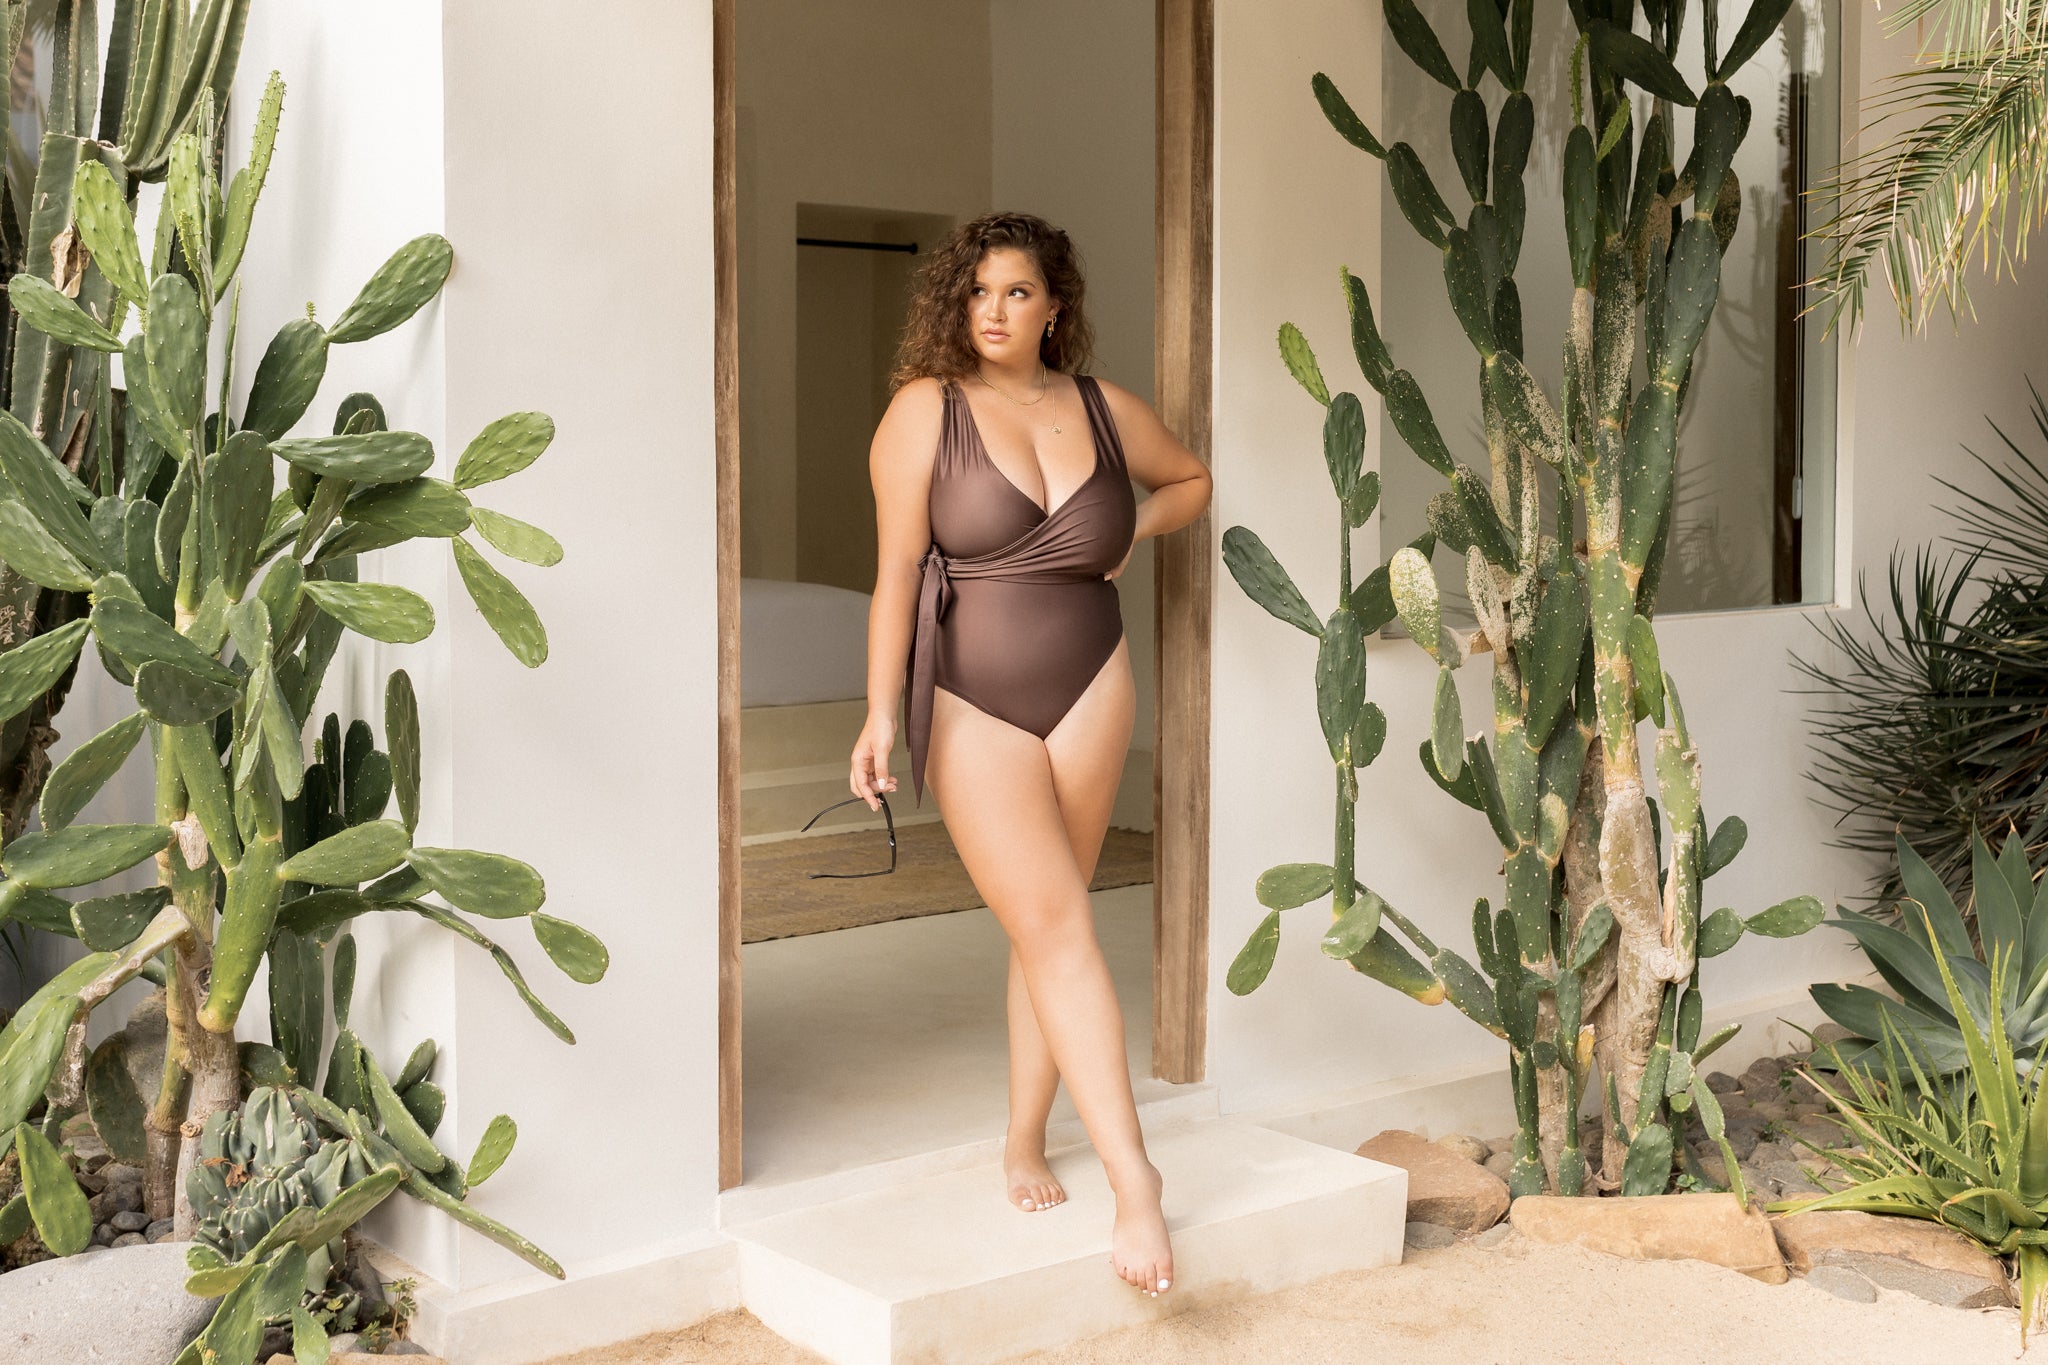 Expert Tips for How To Shop for a Swimsuit With Confidence